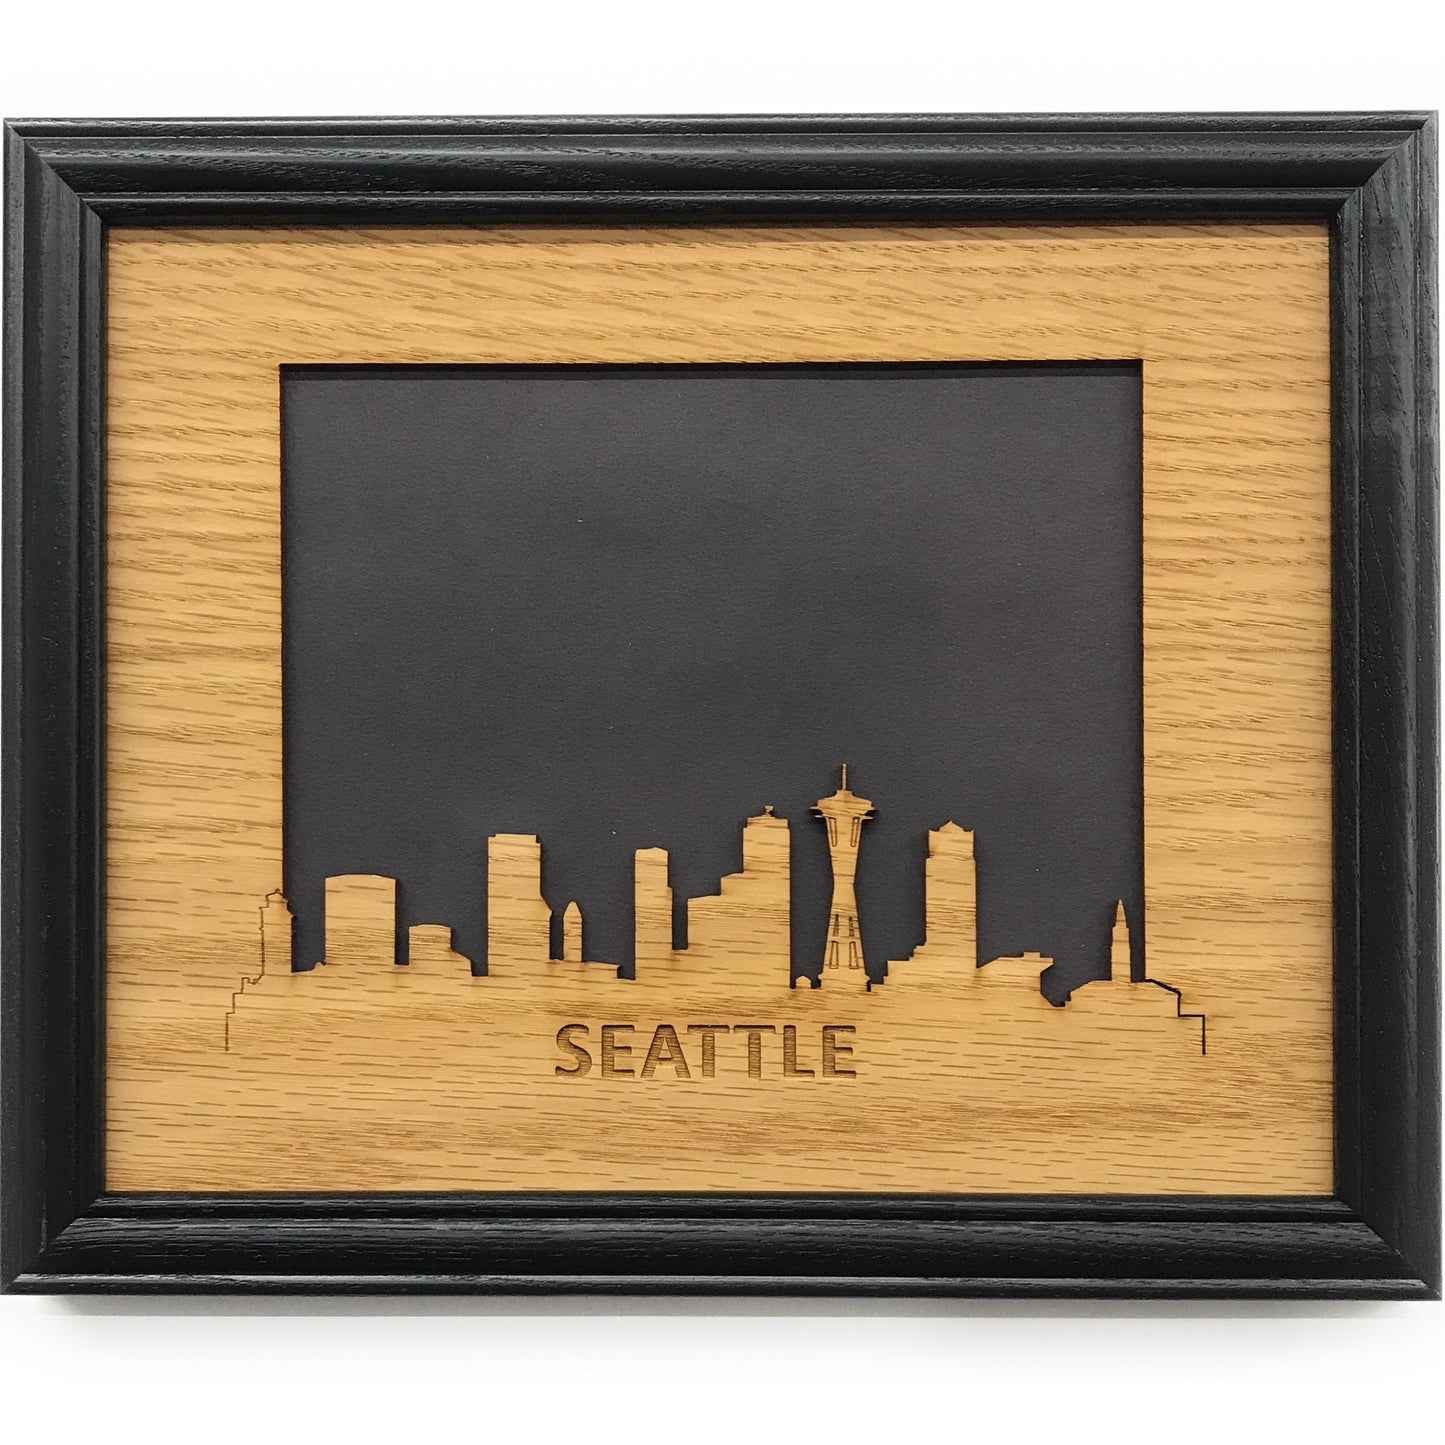 Seattle Picture Frame - 8x10 Frame Hold 5x7 Photo